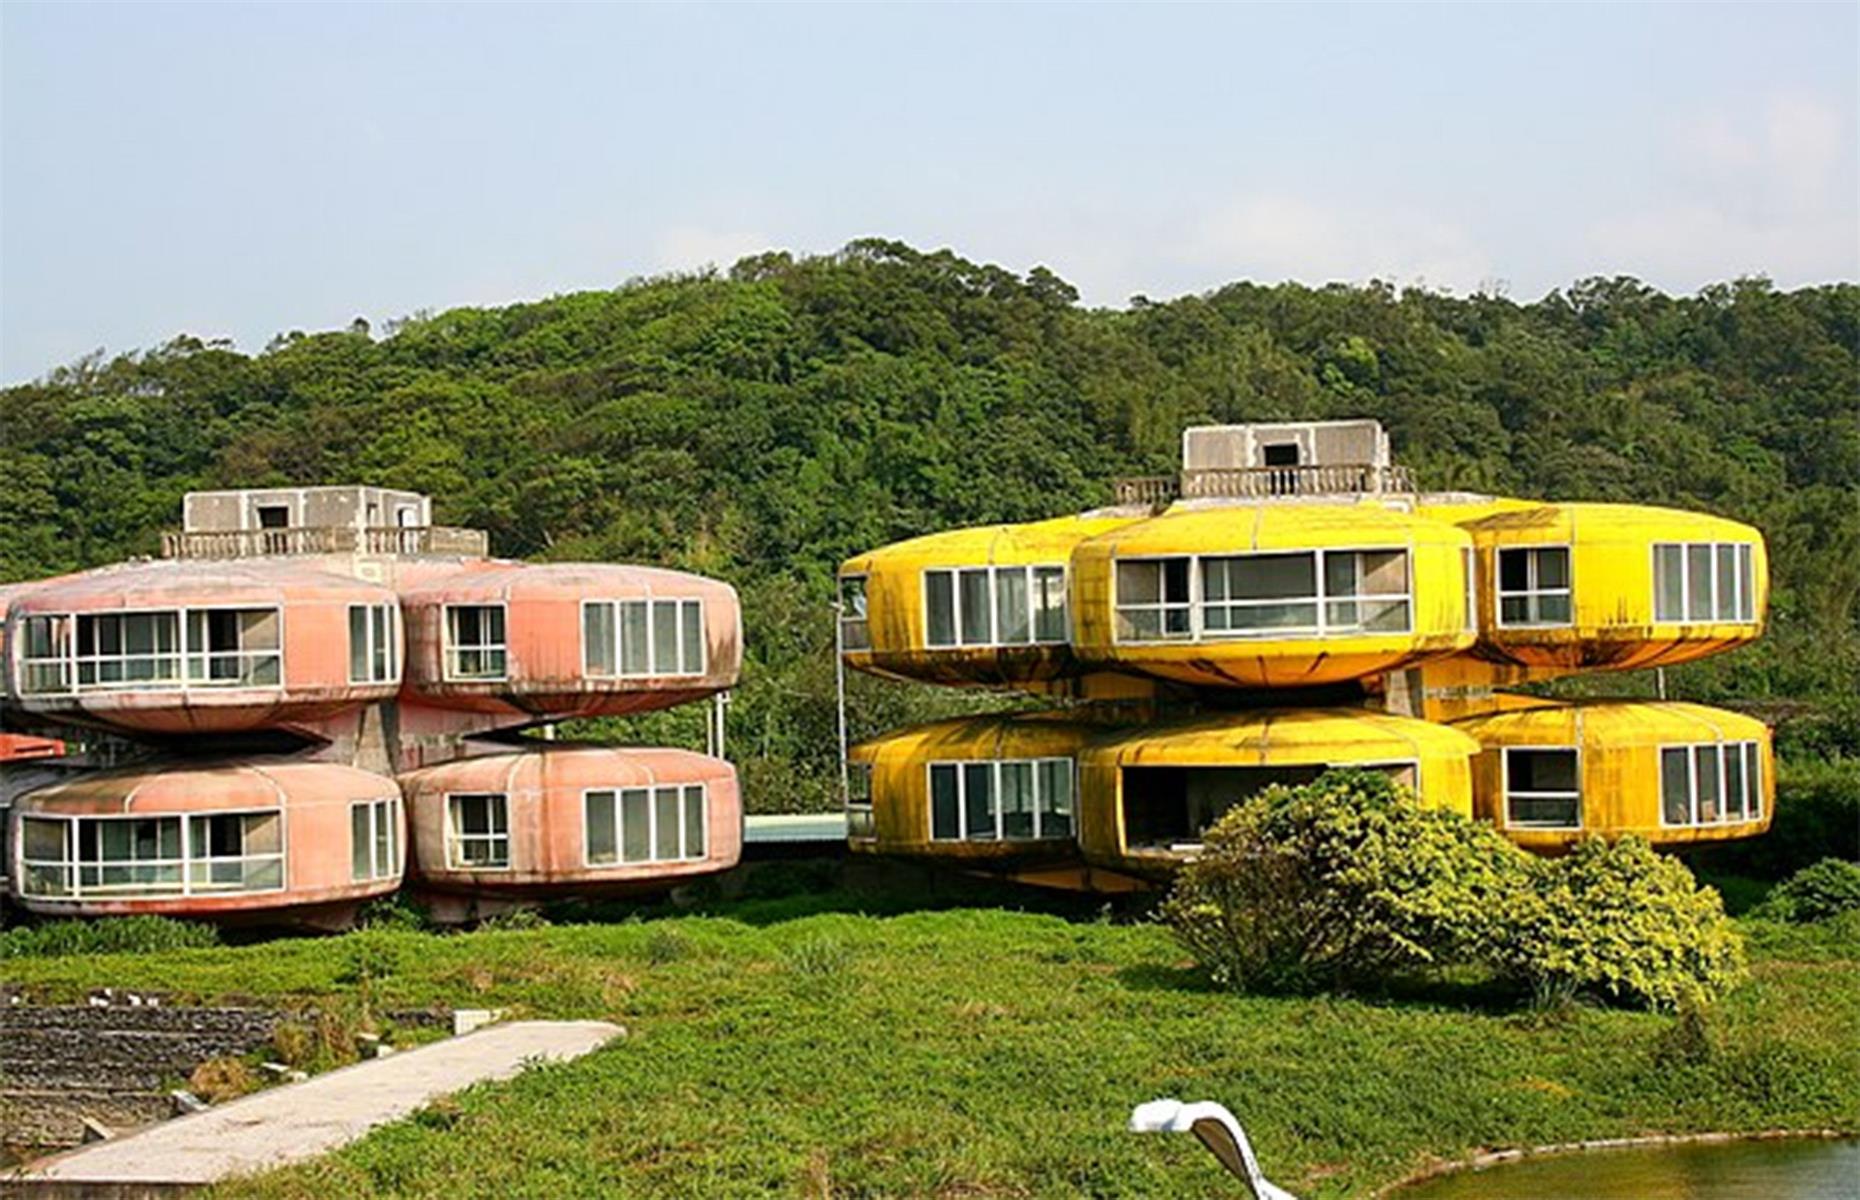 <p>Designed in a retro style that was popular at the time, the price of these unique homes was so high that almost none of the pods sold. Now losing the fight with Mother Nature, they were abandoned on the overgrown coastline, reduced to graffitied ruins frequented by curious tourists.</p>